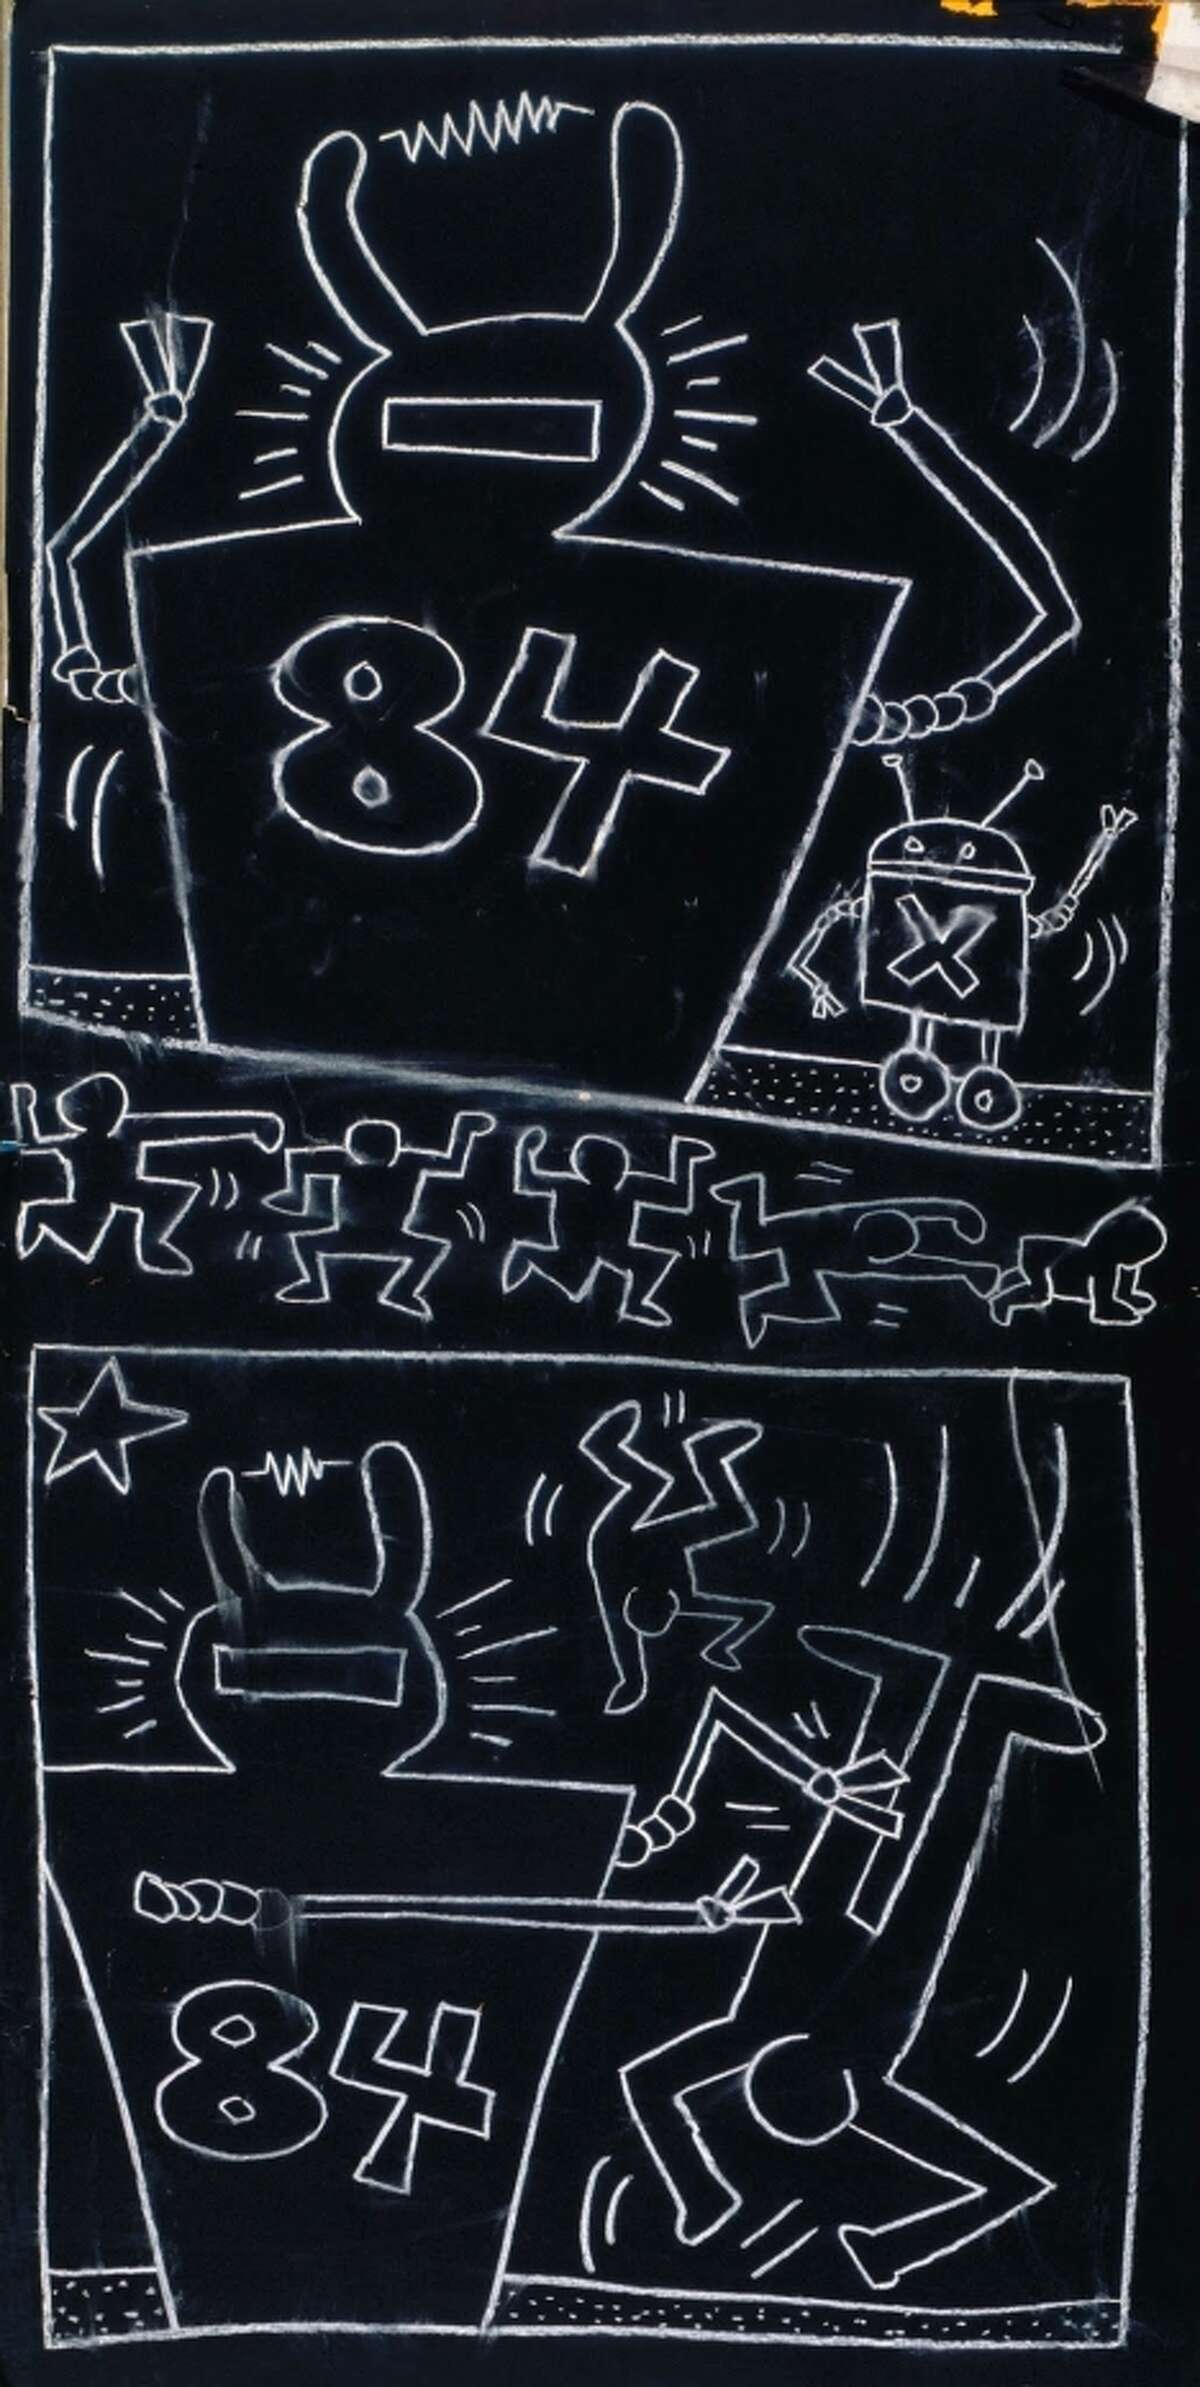 “Untitled” (1984) subway drawing , chalk on paper by by Keith Haring